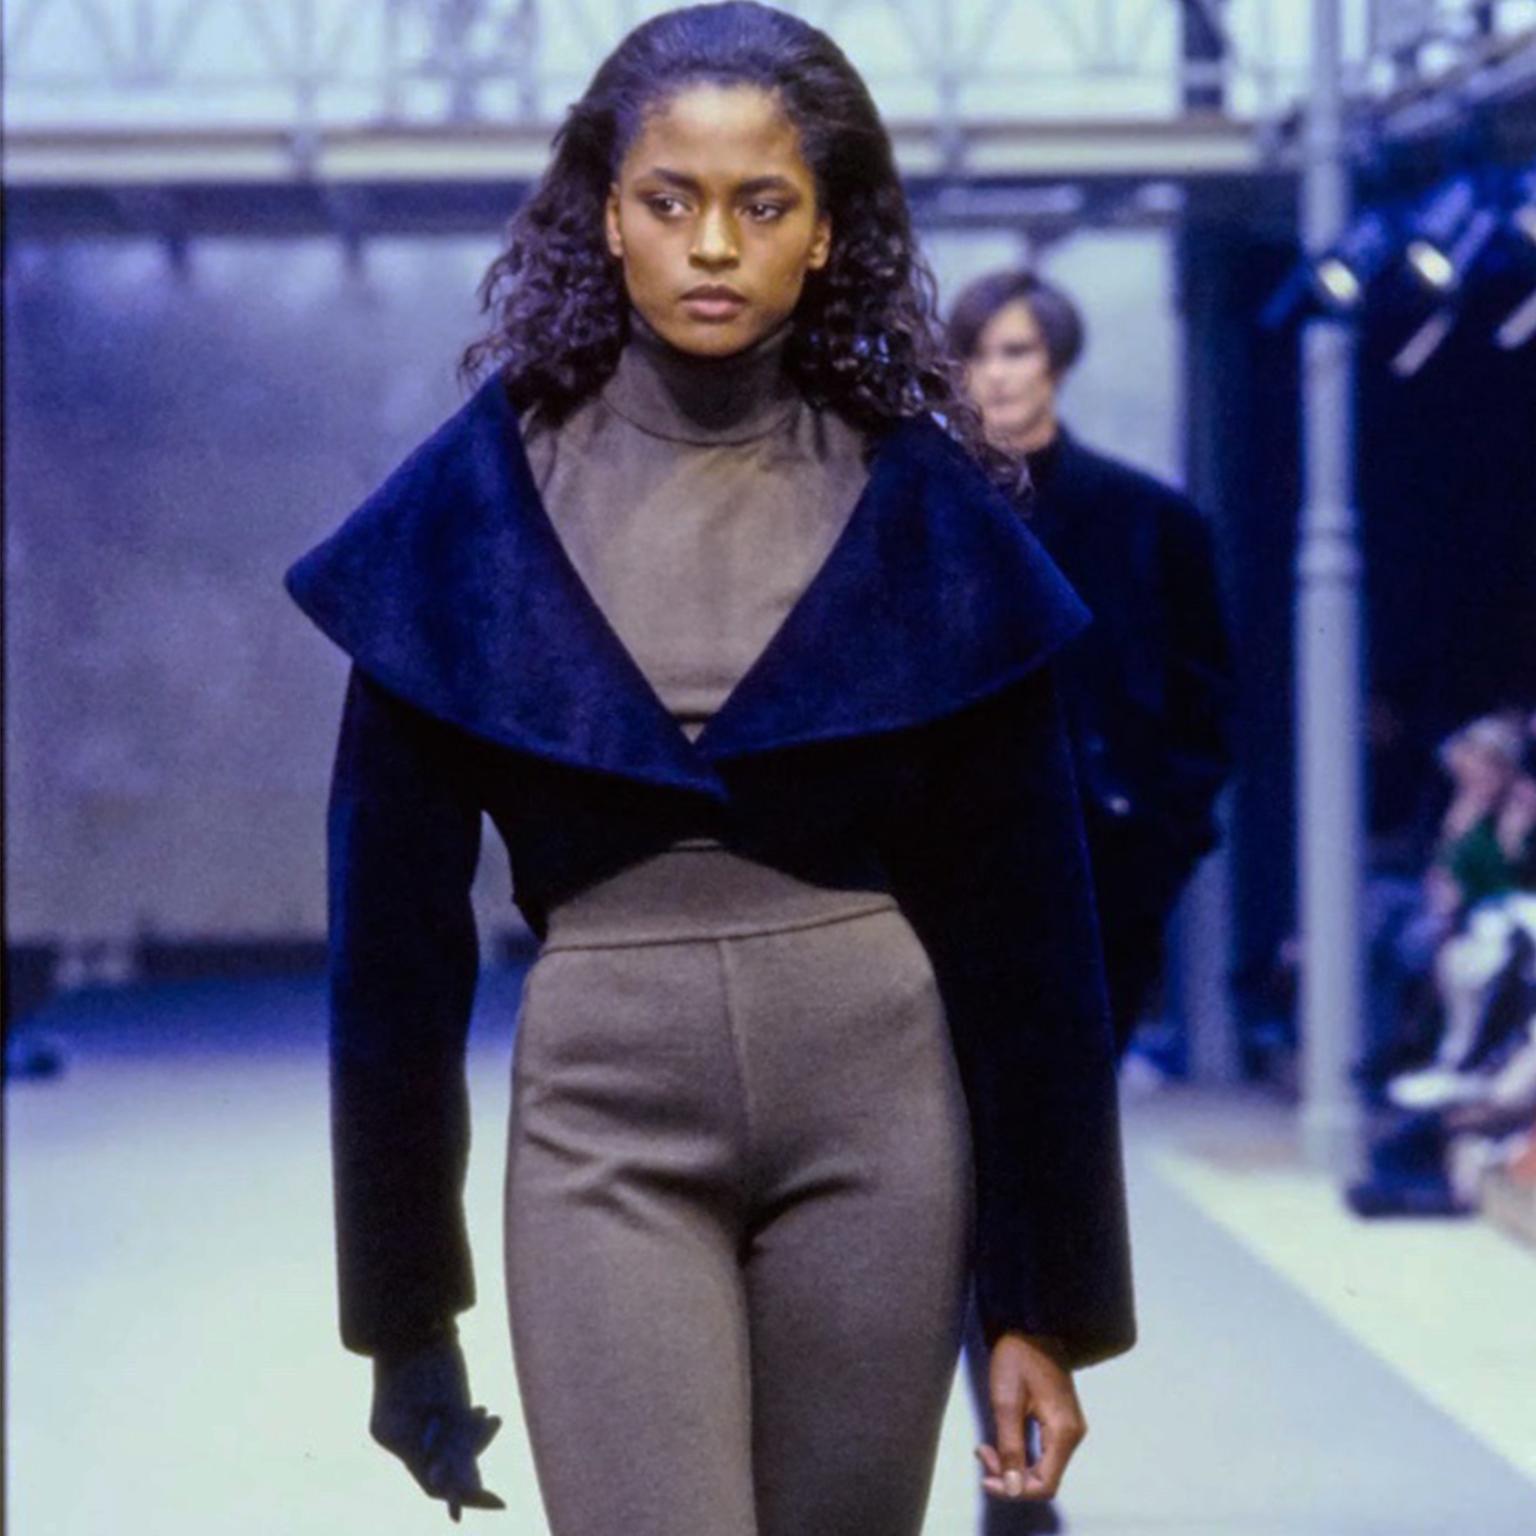 This Alaia vintage cropped black lamb velvety suede jacket was featured on the Fall 1989 Alaia runway in a range of colors. Alaia jackets are so perfect to have in your closet to add instant style and interest to anything you wear them with! This